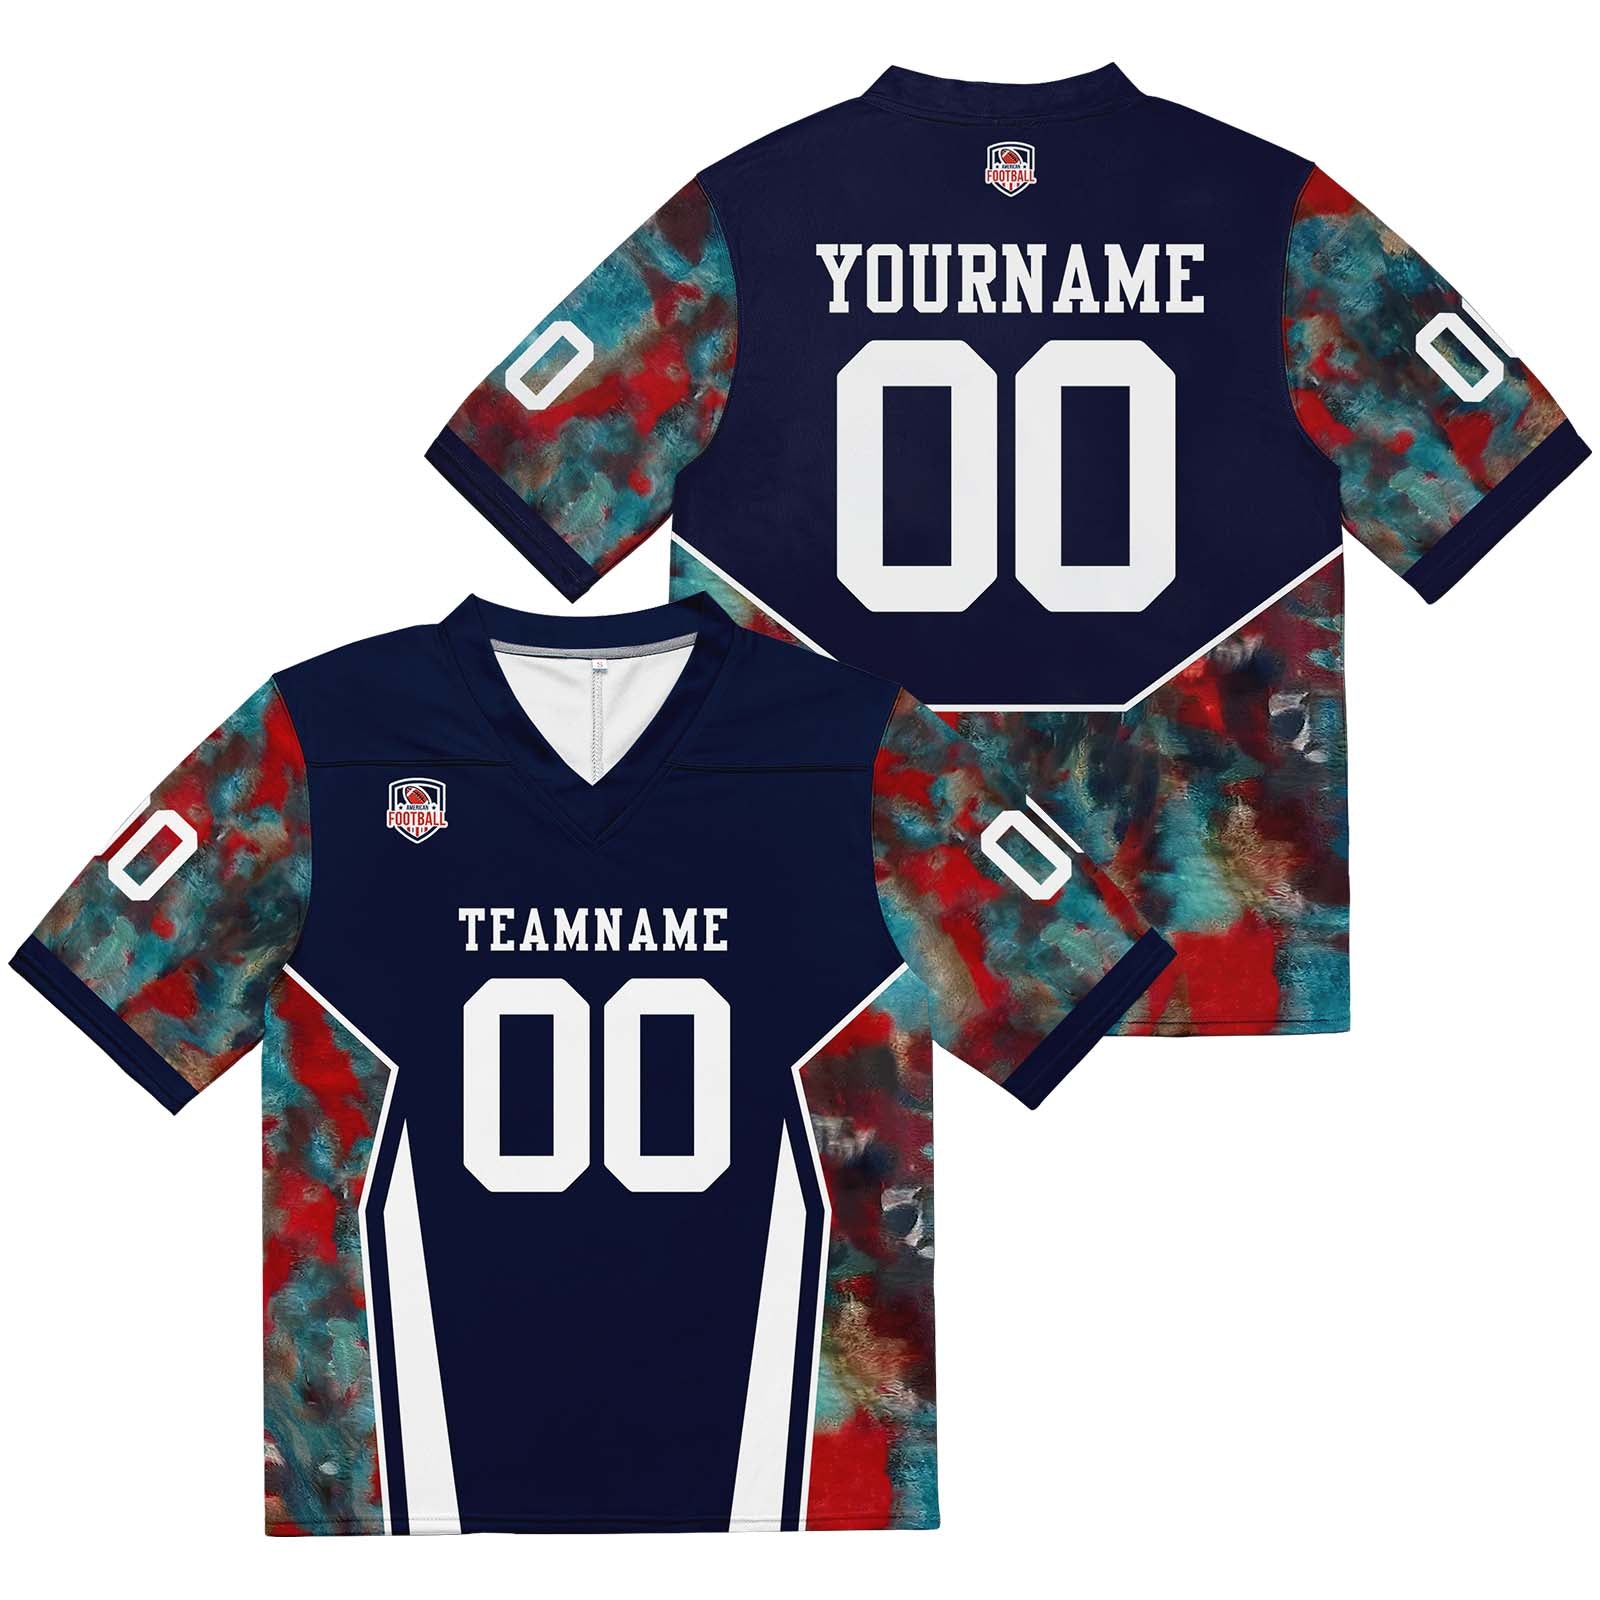 Custom Football Jersey Shirt Personalized Stitched Printed Team Name Number Navy & Red